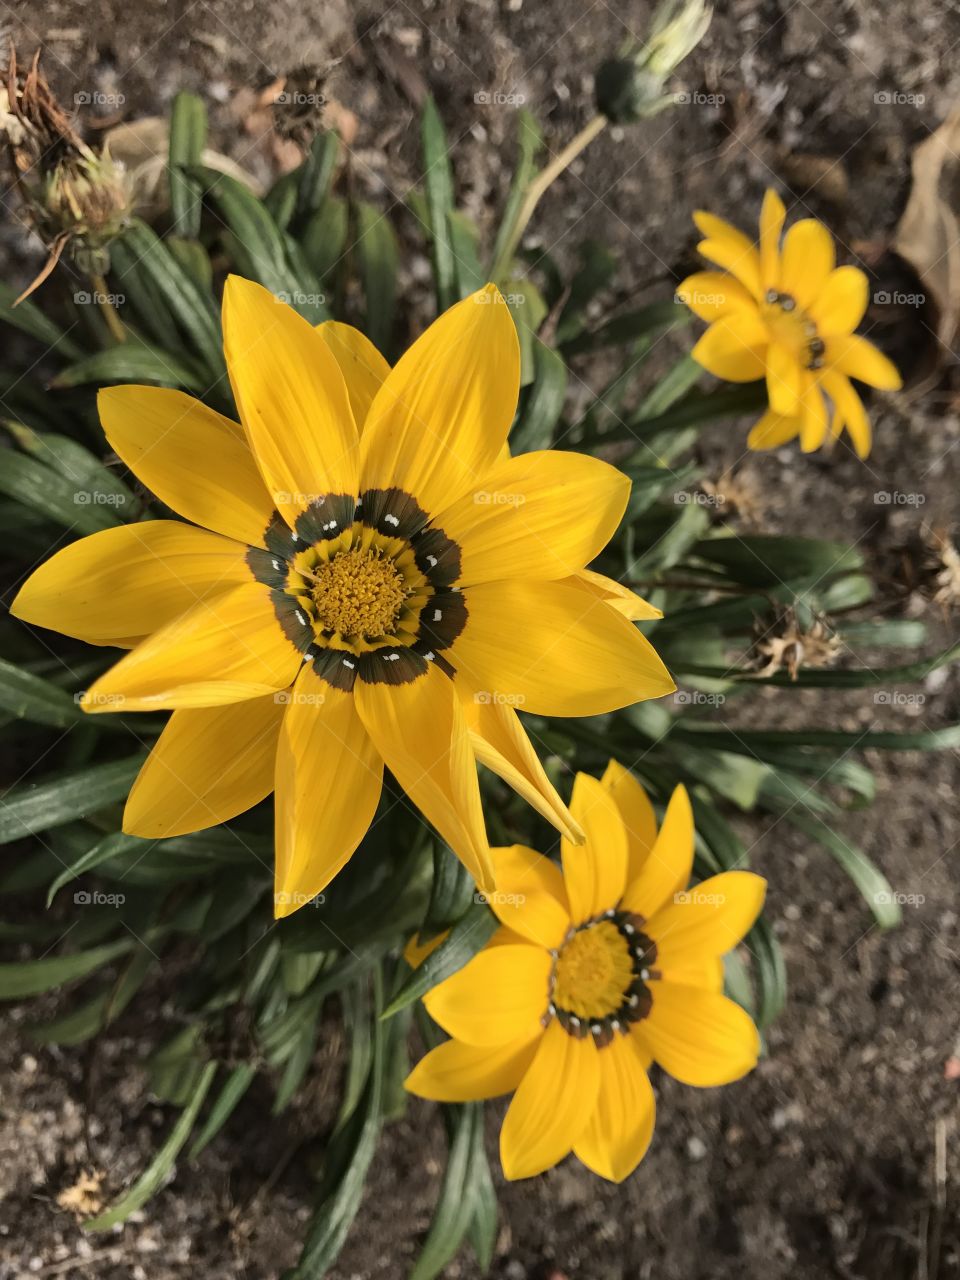 Some yellow flowers in my garden 